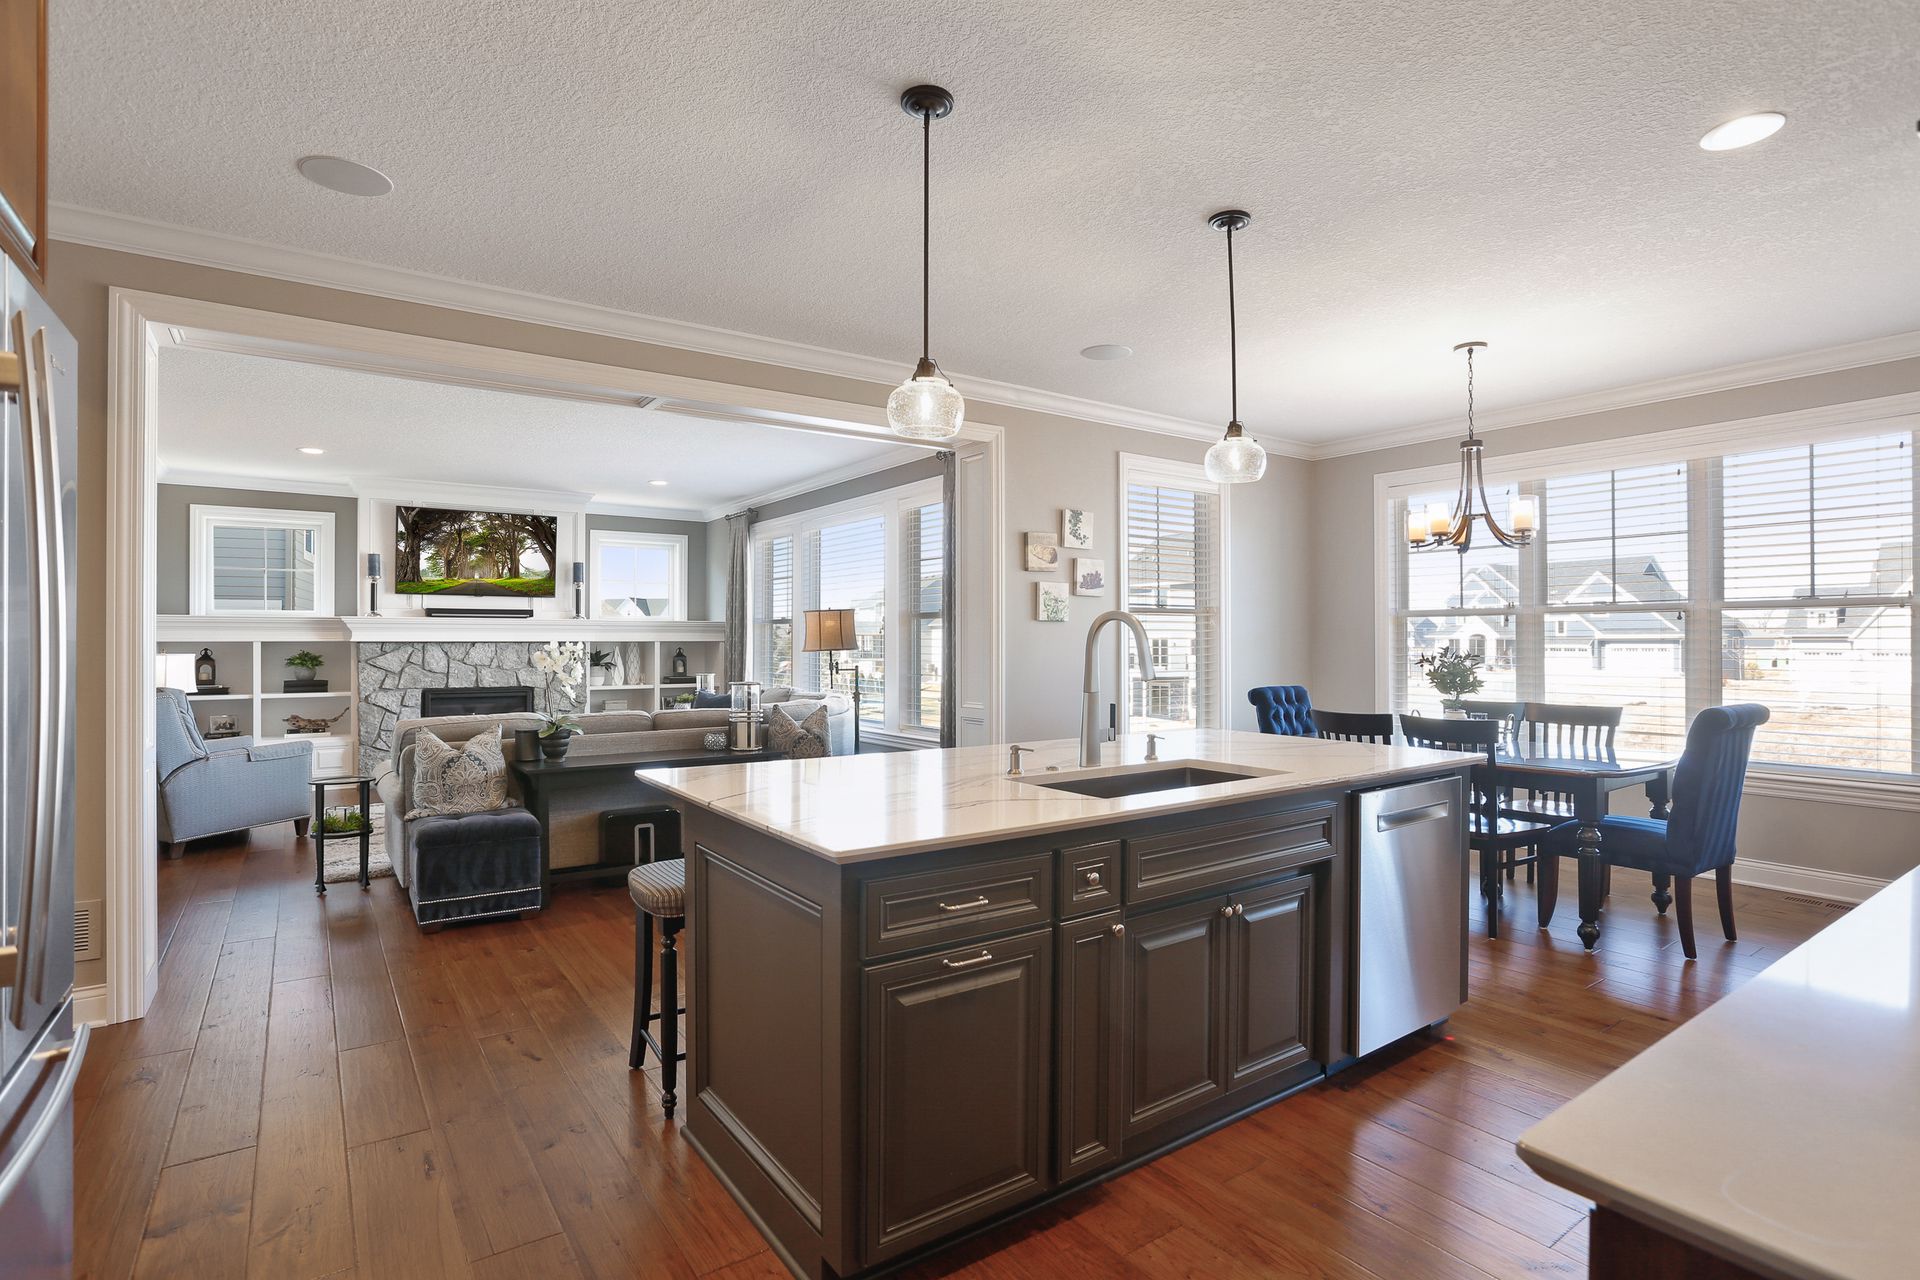 Kitchen is great for entertaining.